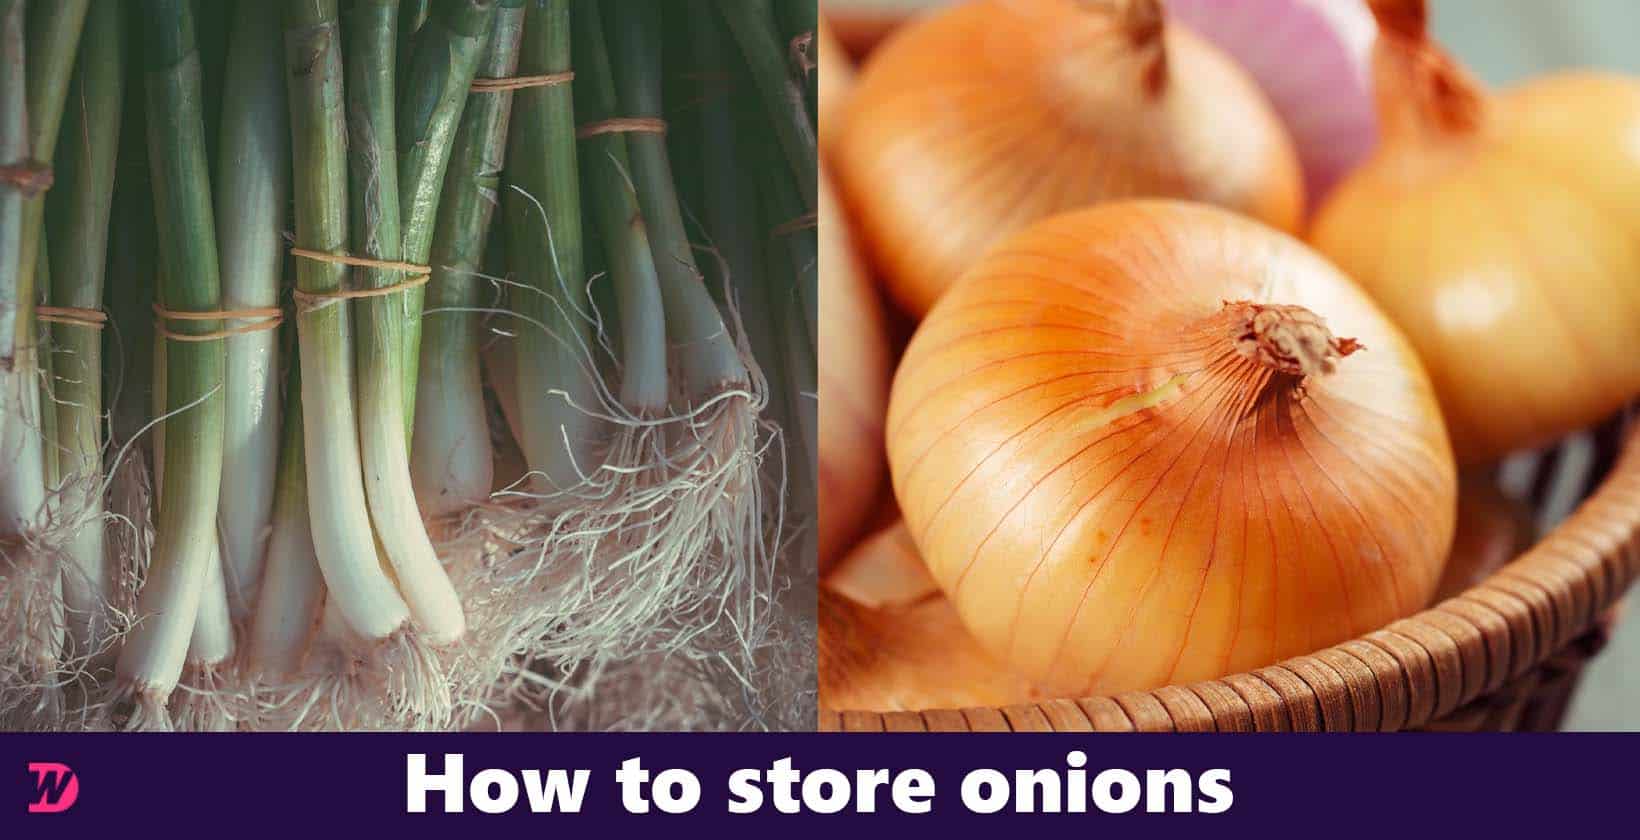 How to store onions